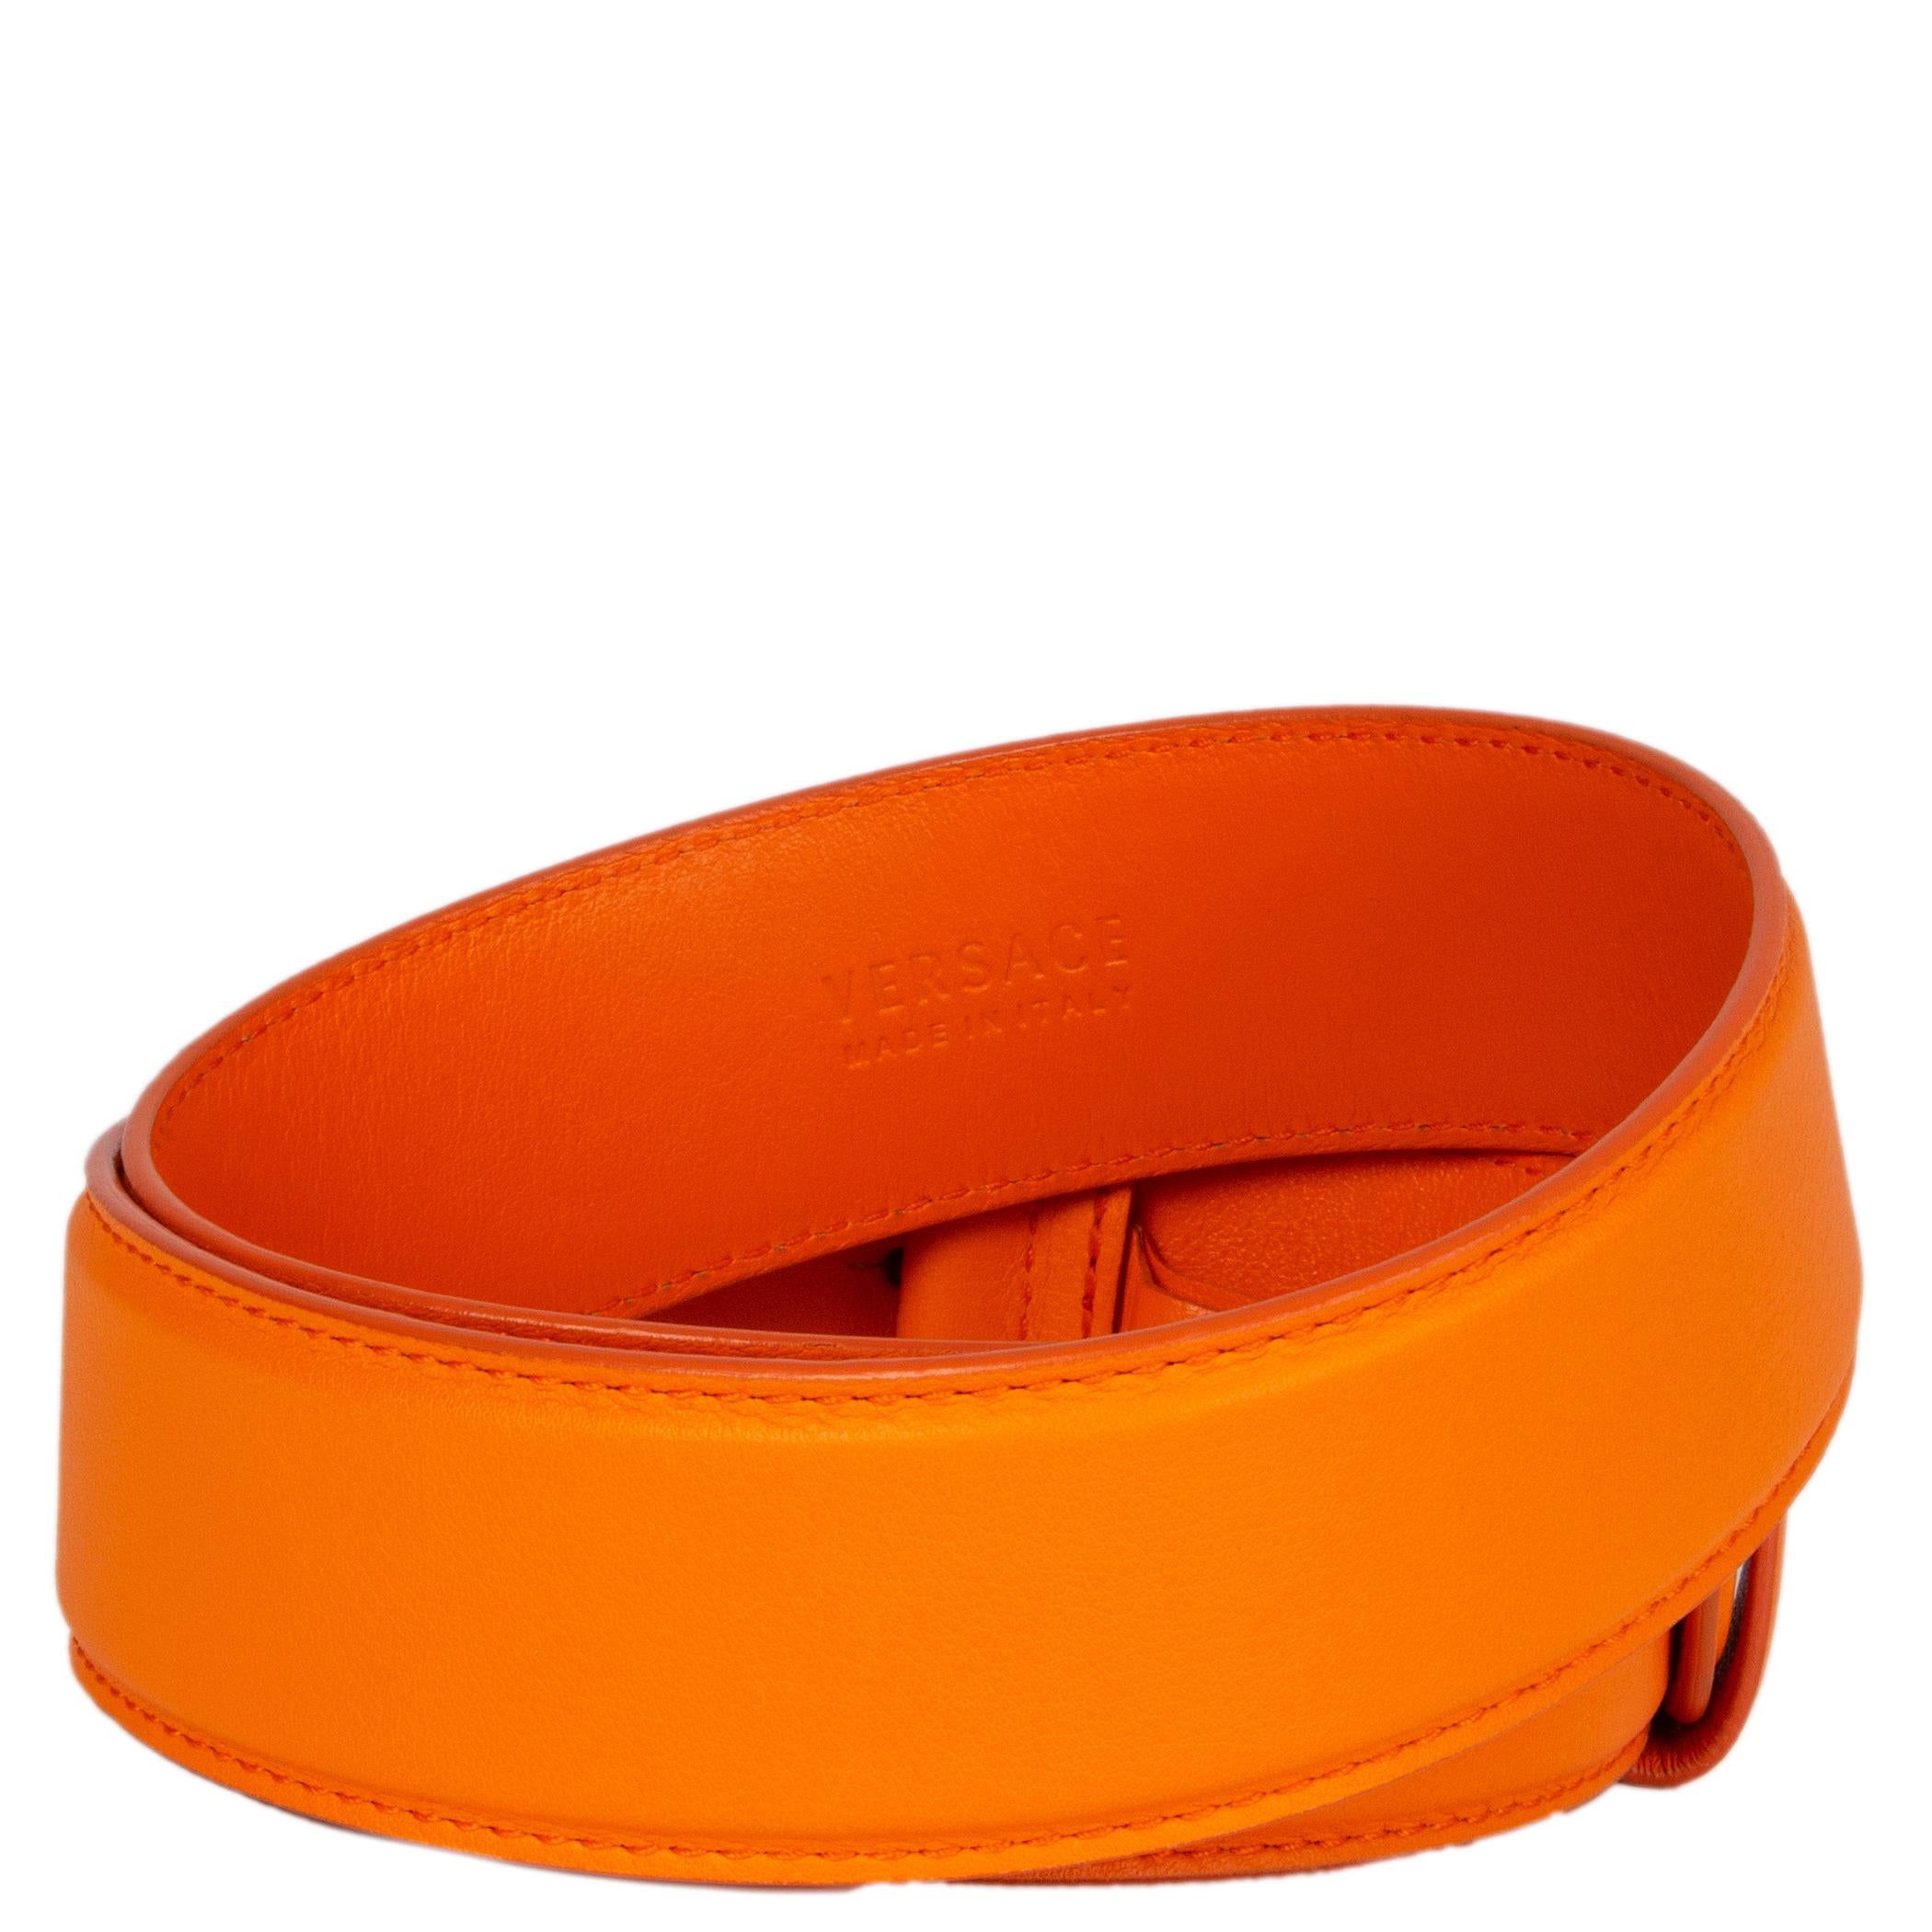 Versace belt in orange calfskin with a round gold- and silver-tone medusa metal buckle. Has been worn and is in excellent condition. 

Tag Size 75
Width 4cm (1.6in)
Fits 70cm (27.3in) to 80cm (31.2in)
Length 89cm (34.7in)
Buckle Size Height 5cm